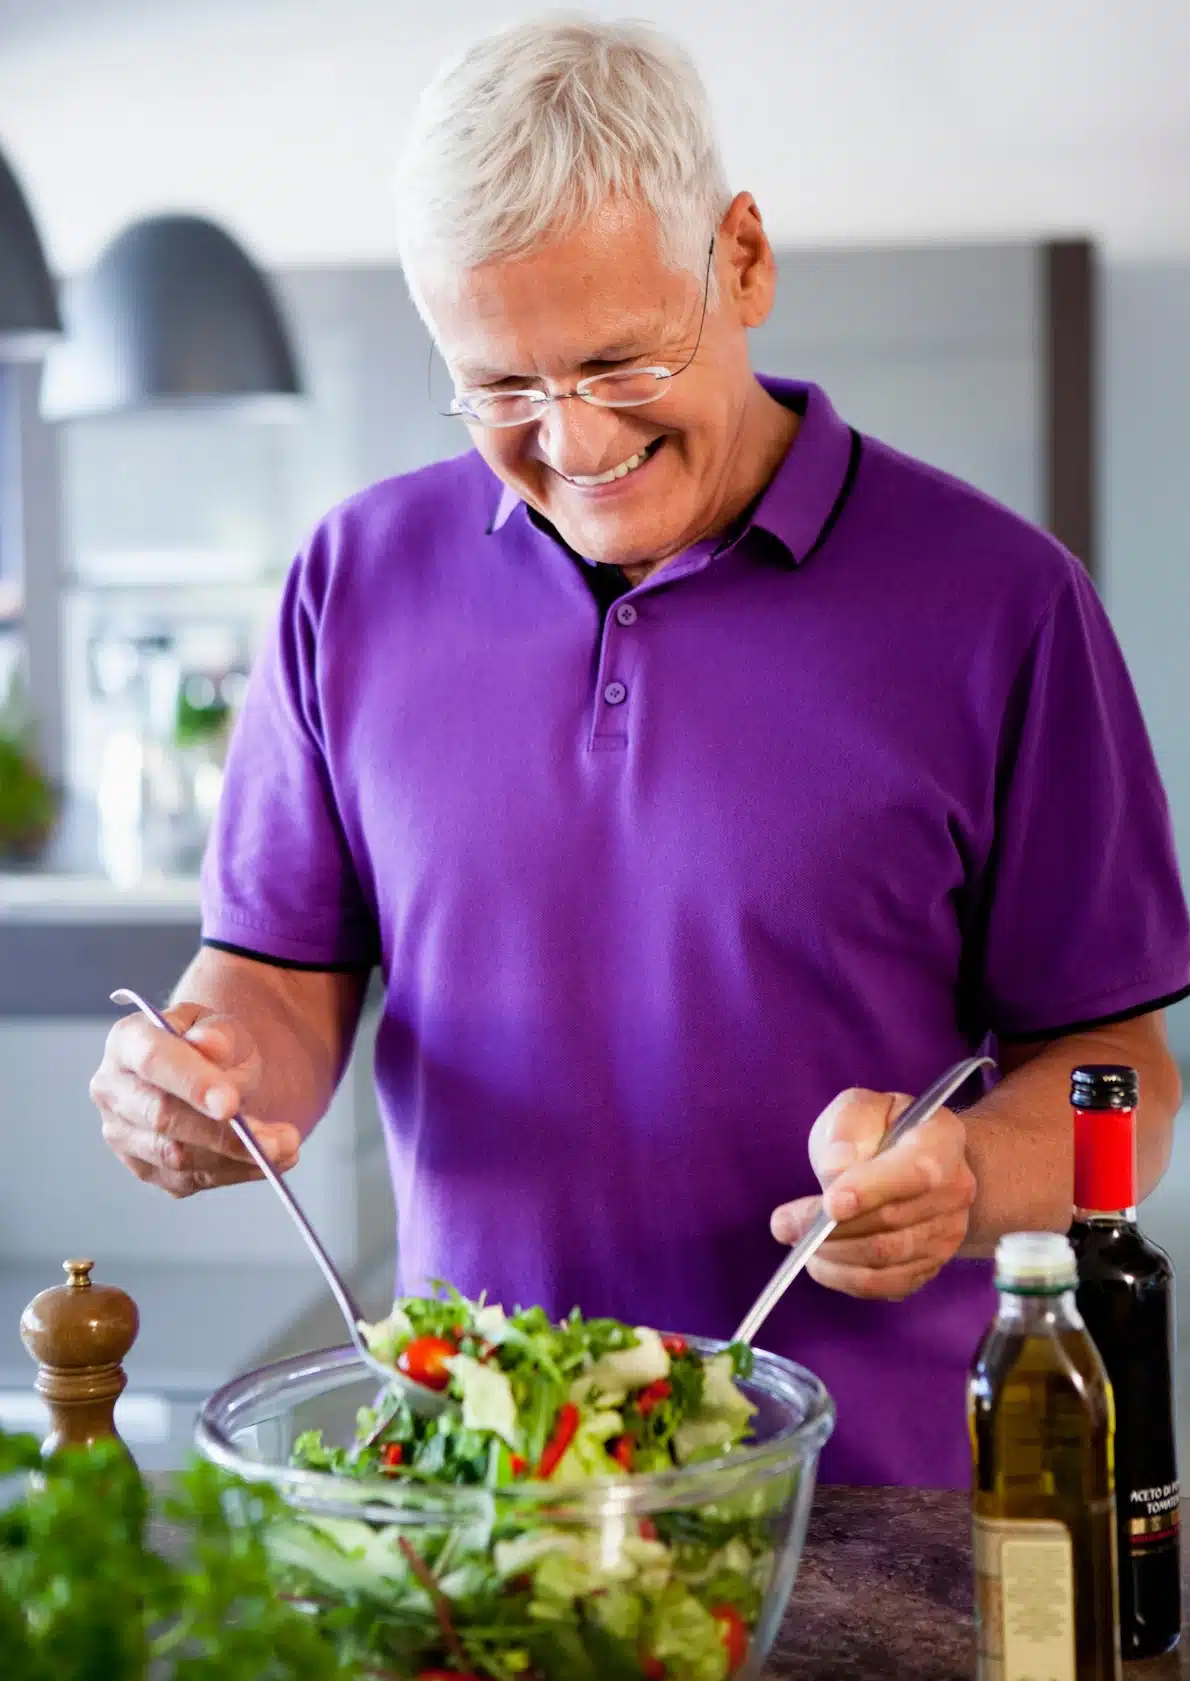 Photo of an older gentleman preparing a salad for lunch